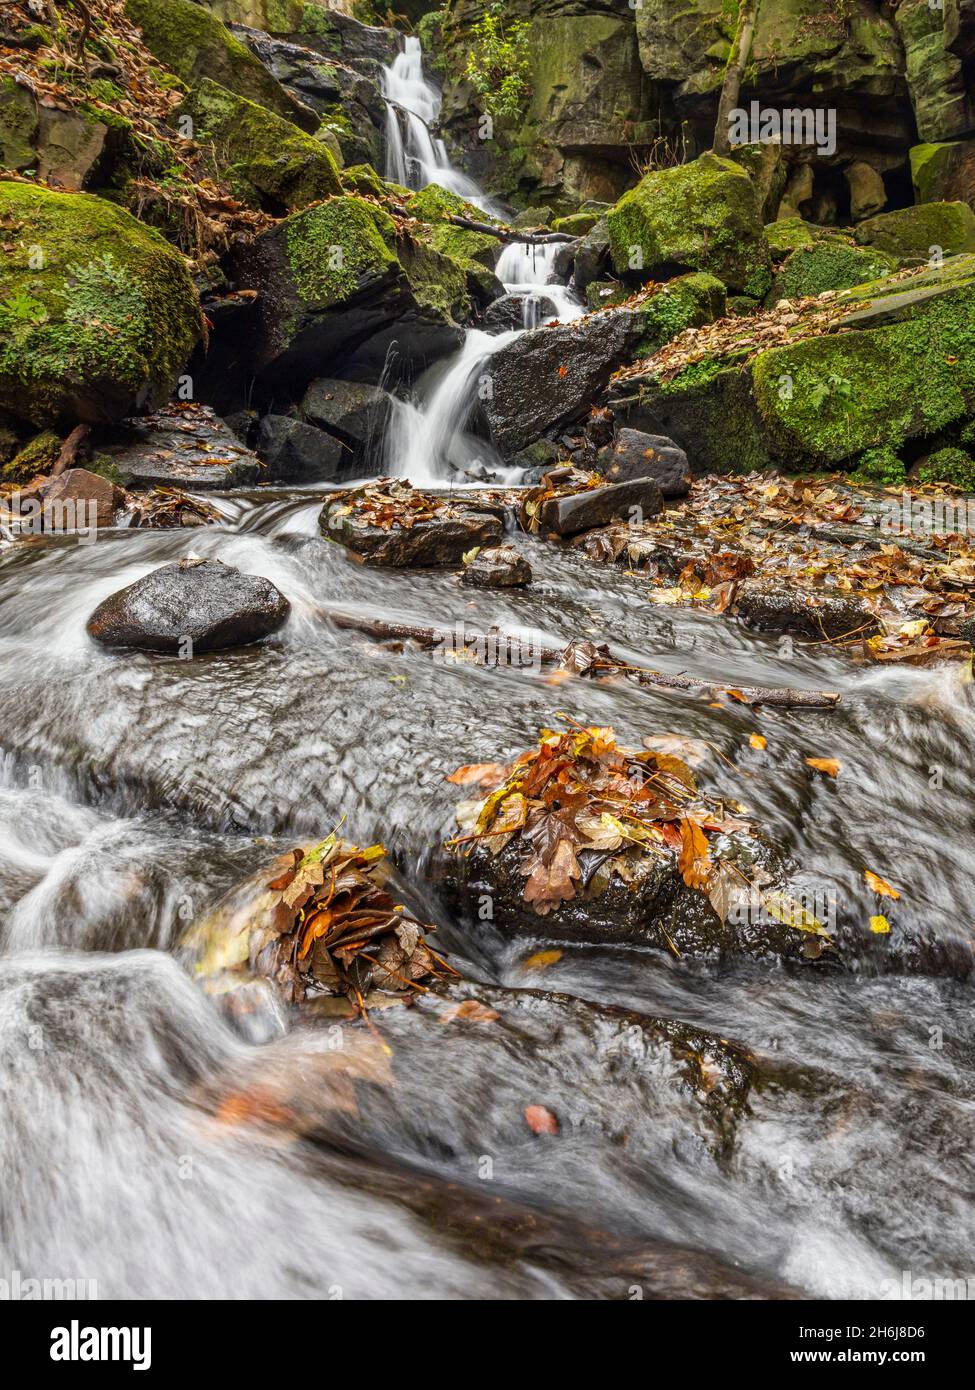 Autumn at Lumsdale Falls, set along the Lumsdale Valley and a short walk from Matlock in Derbyshire, on the edge of the Peak District National Park. Stock Photo